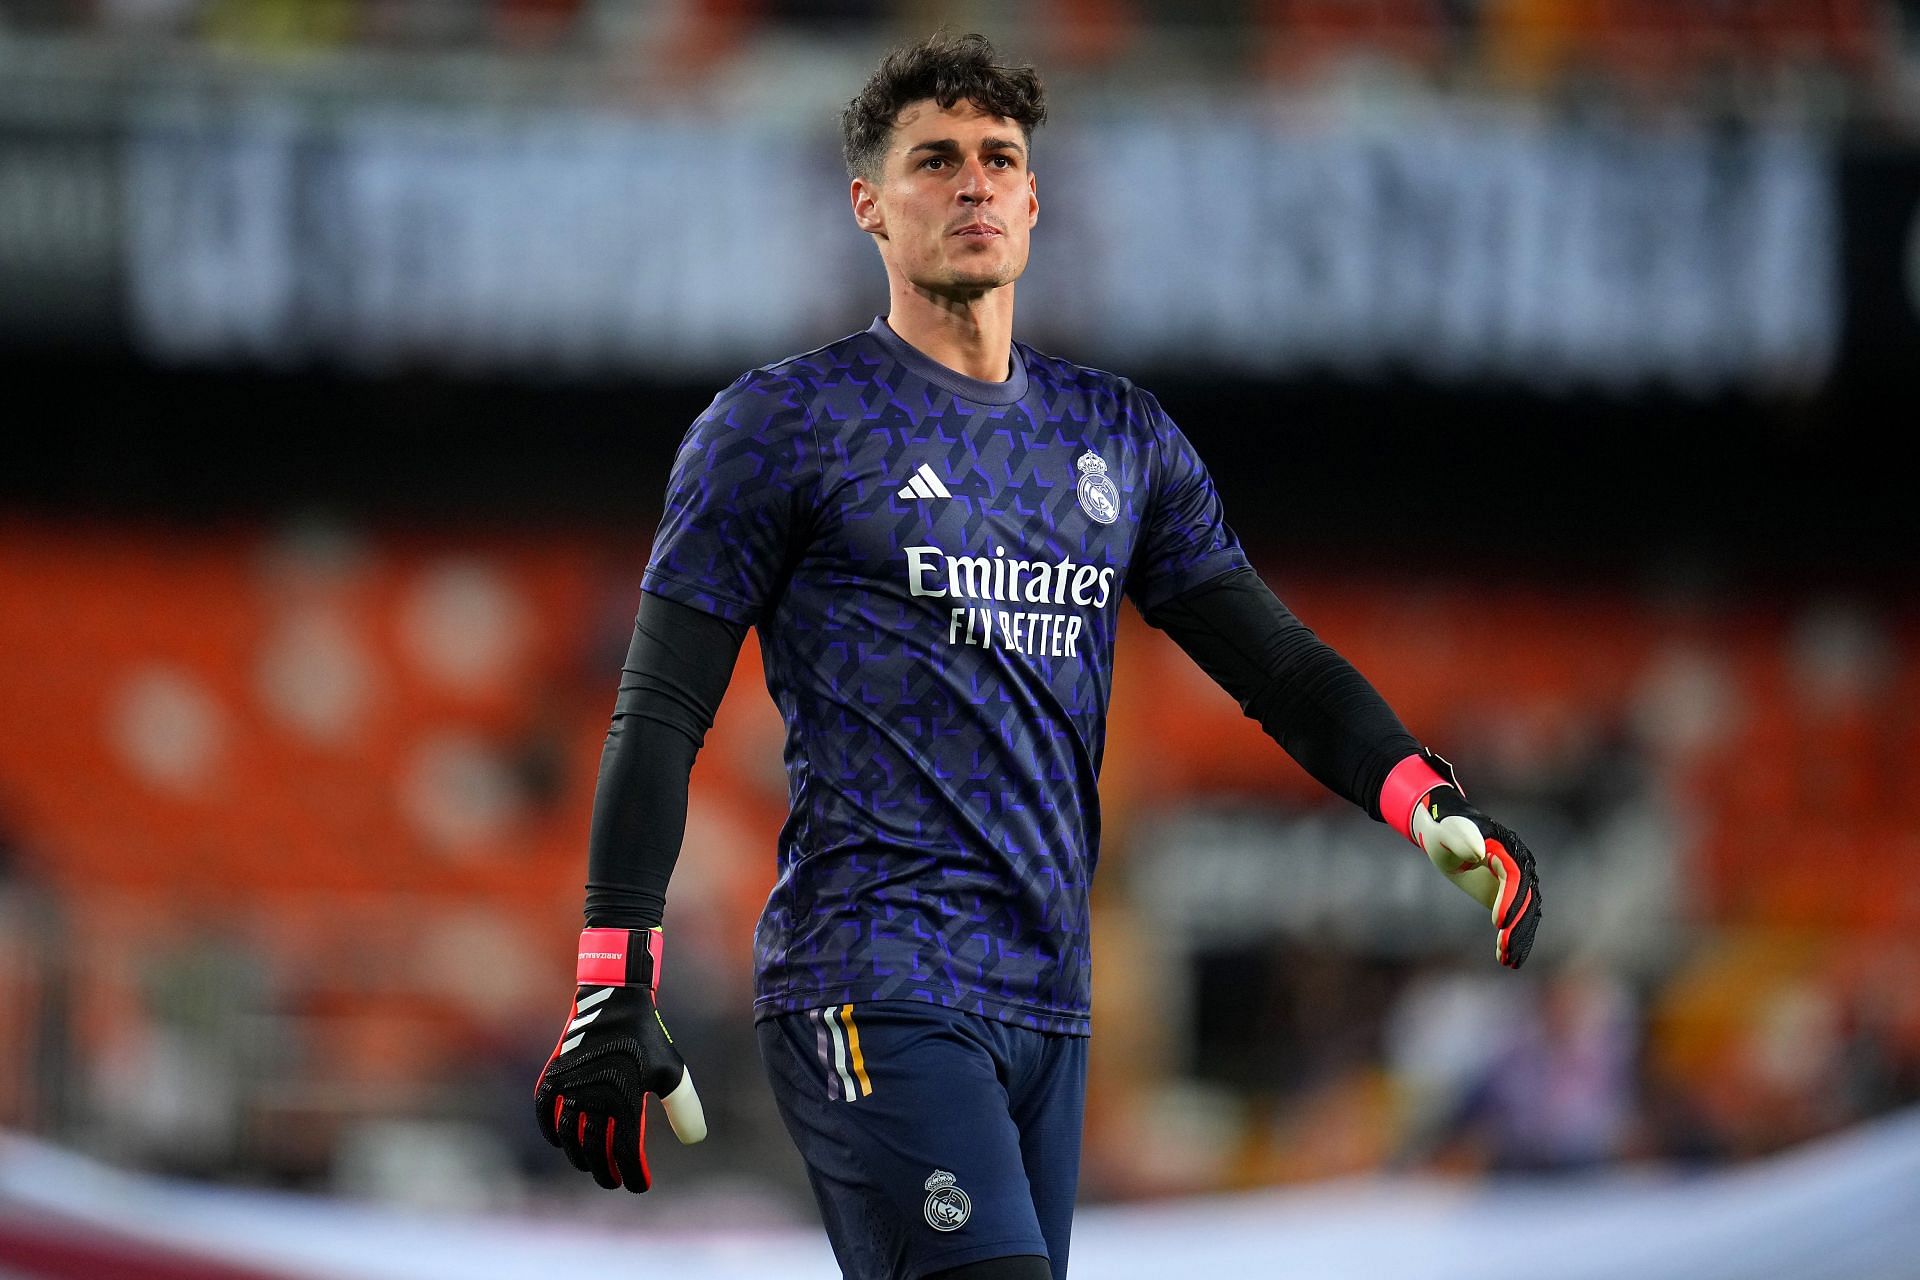 Kepa has failed to earn a permanent move to Real Madrid.